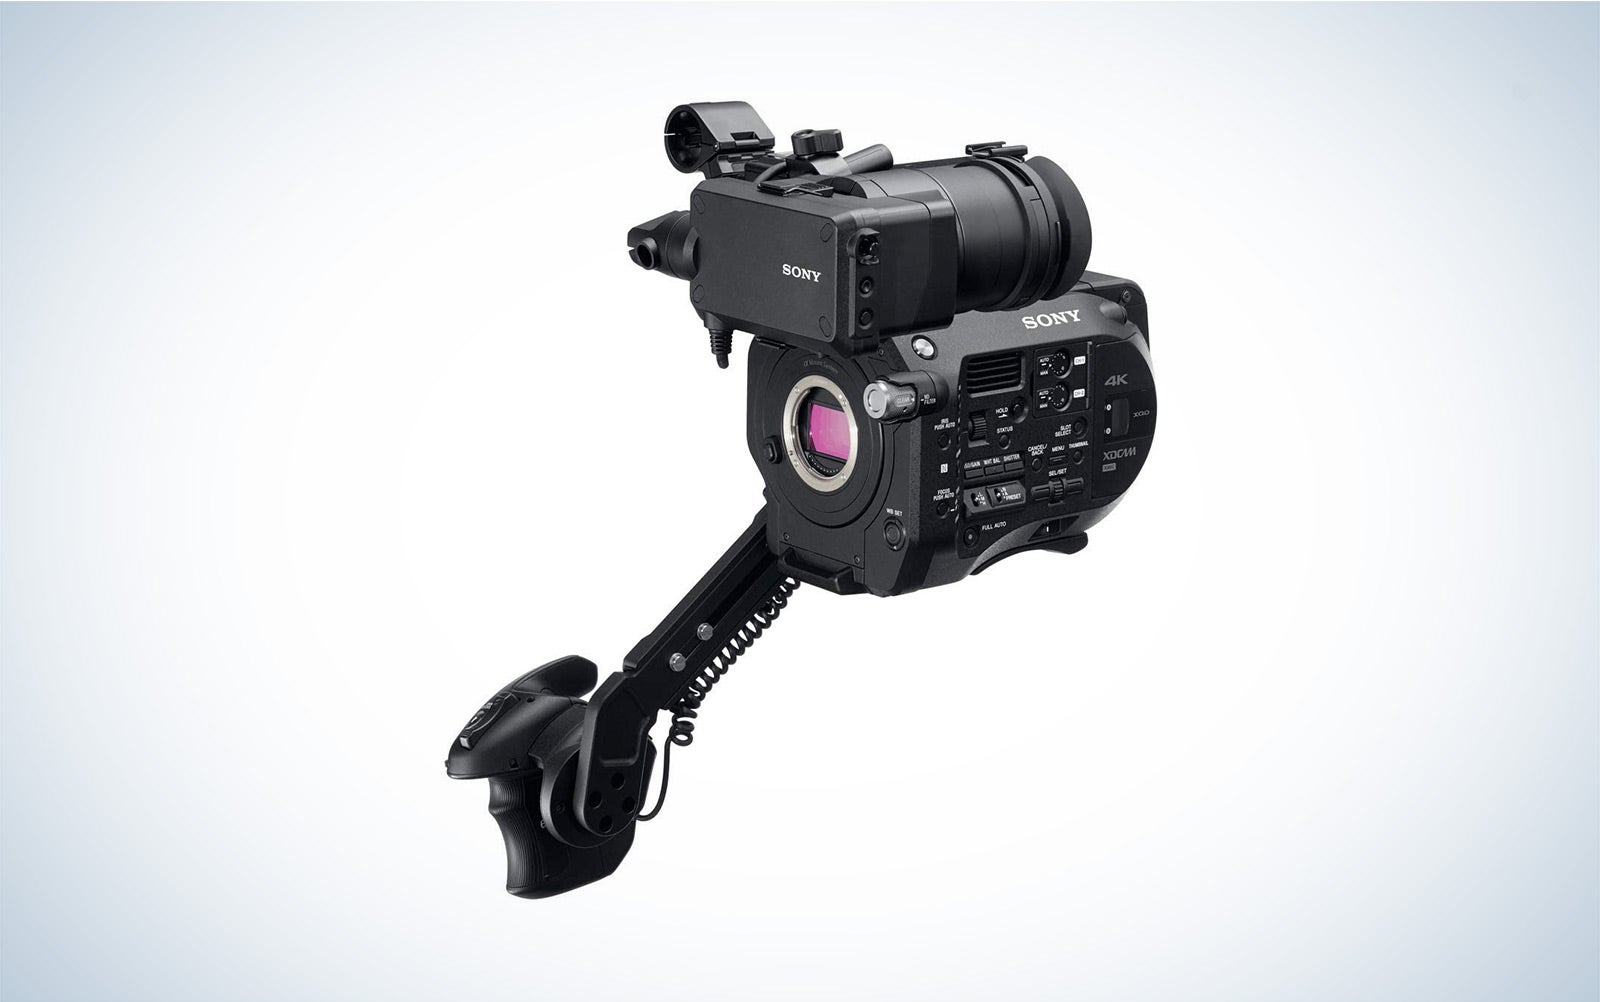 The Sony PXW-FS7 XDCAM Super 35 Camera System is the best video camera for indie filmmakers.